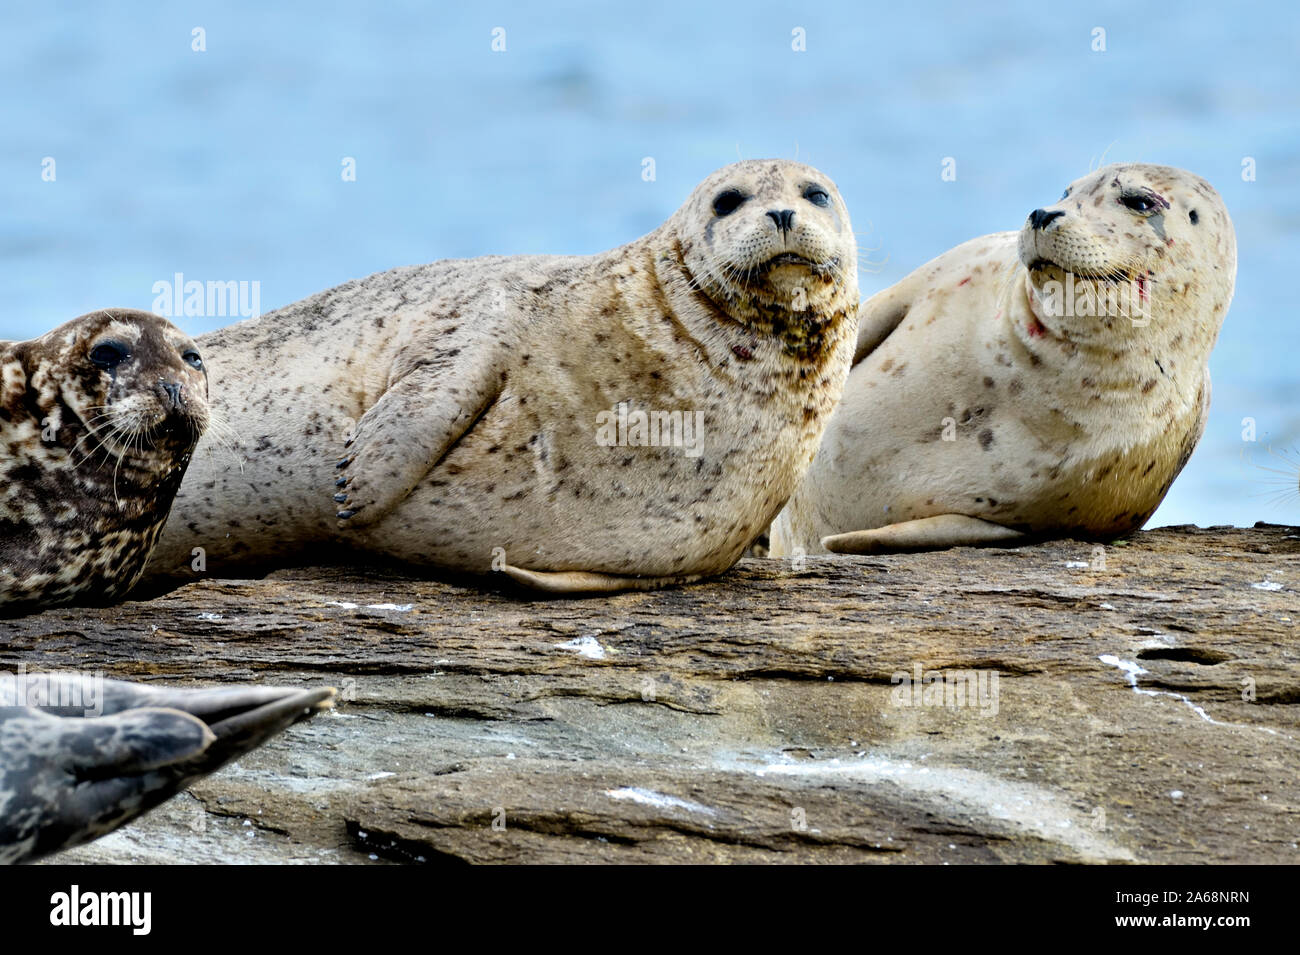 A herd of harbour seals (Phoca vitulina);  lay basking in the warm sunlight on a rocky island beach near Vancouver Island British Columbia Canada Stock Photo